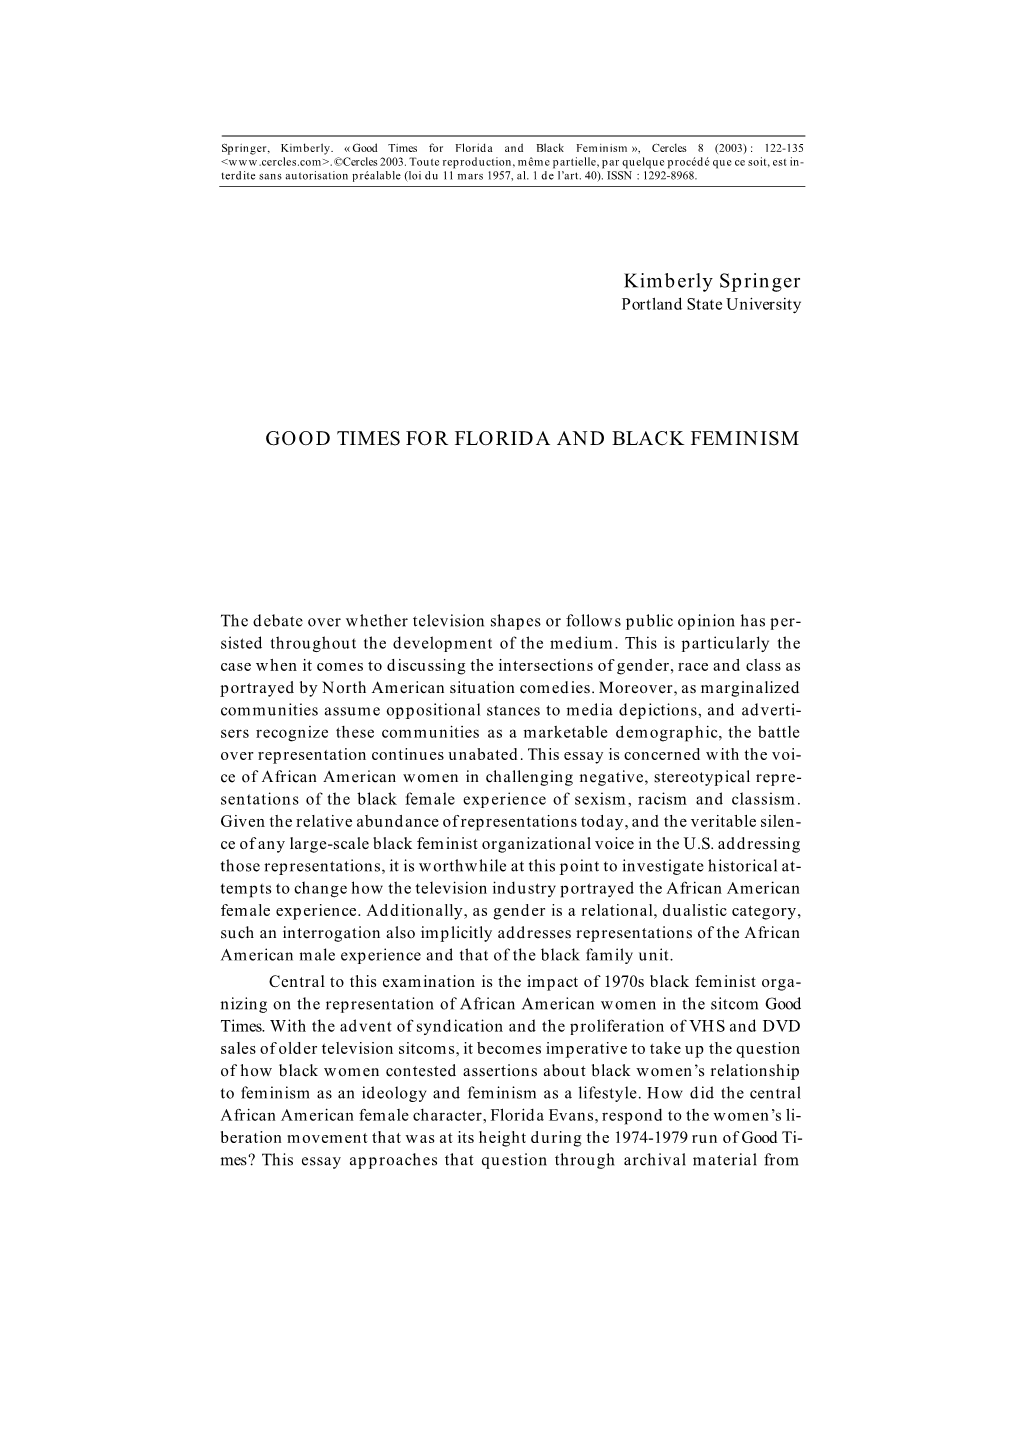 Kimberly Springer GOOD TIMES for FLORIDA and BLACK FEMINISM